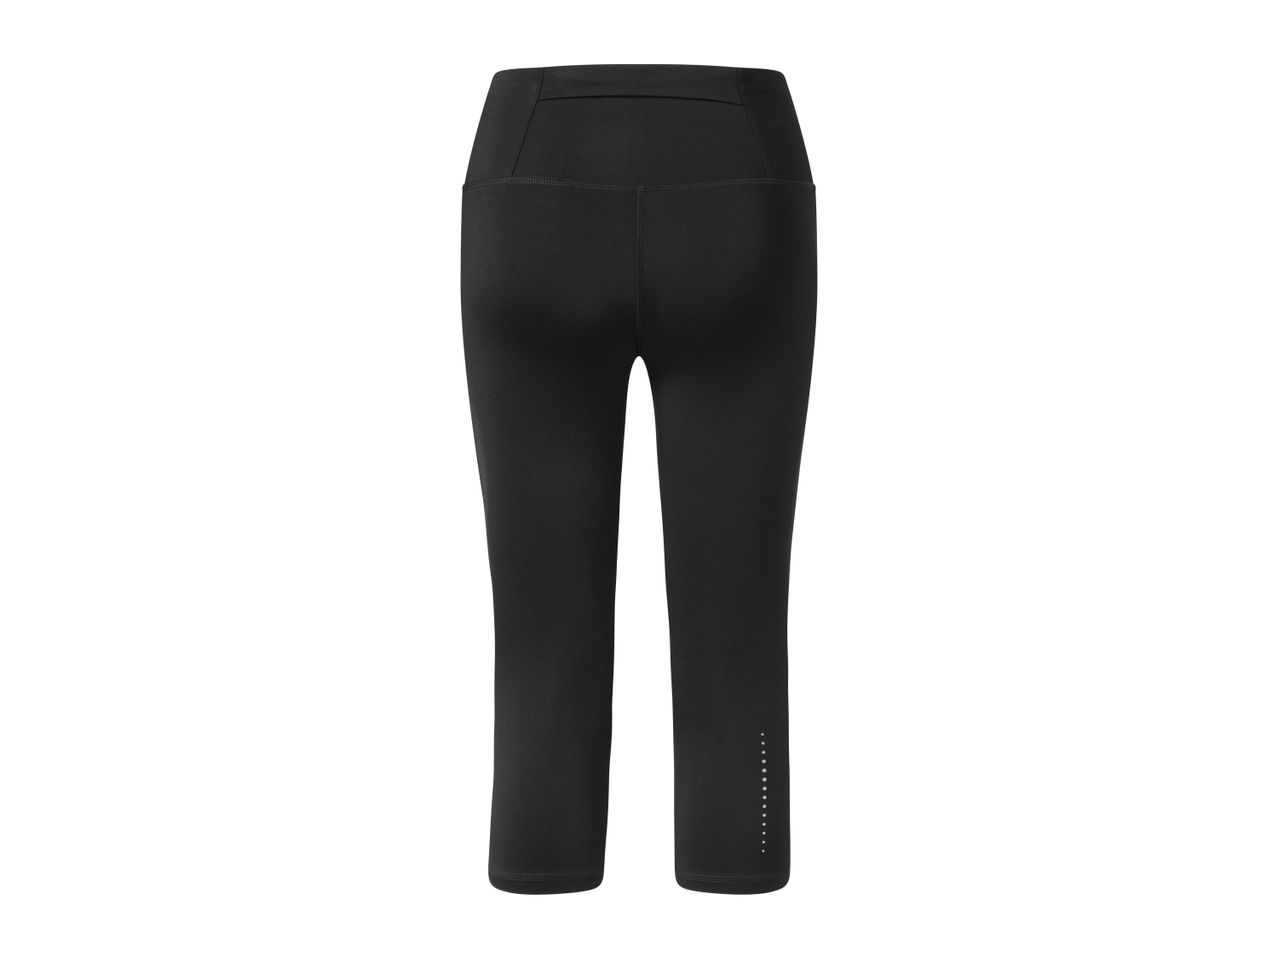 Go to full screen view: Crivit Ladies’ Cropped Sports Leggings - Image 6